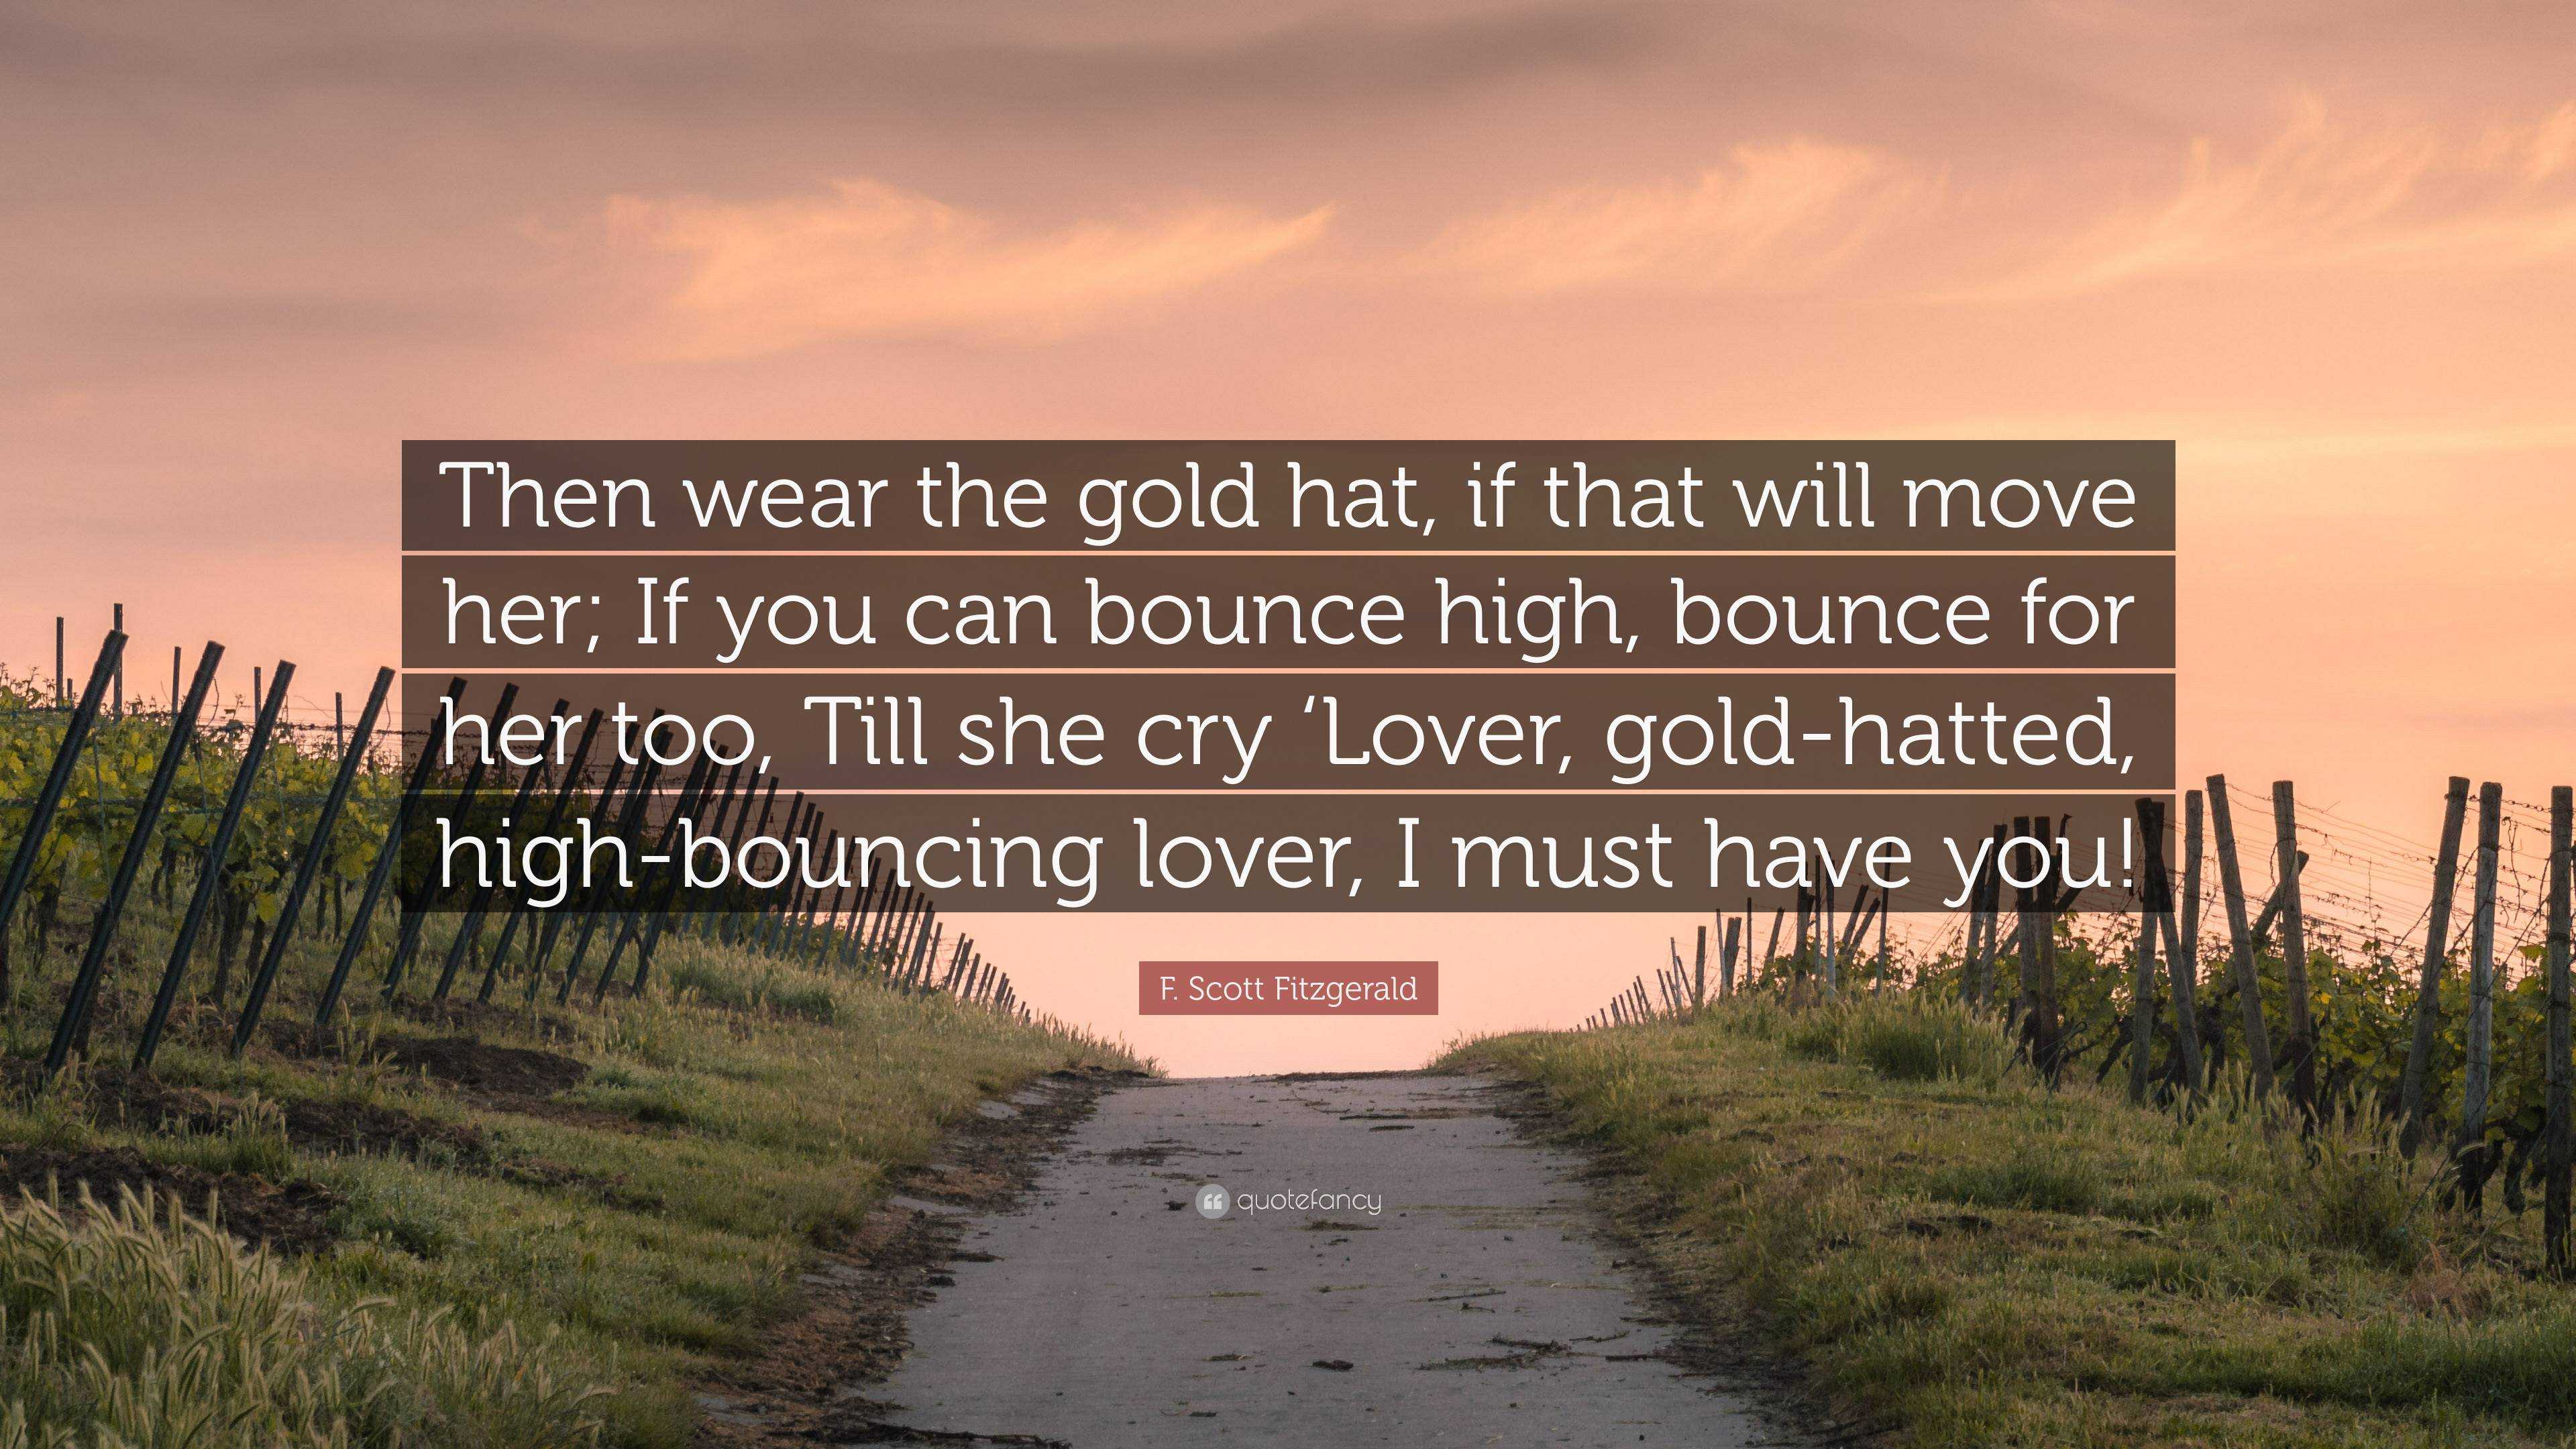 F. Scott Fitzgerald Quote: “Then wear the hat, if that will move her; If you can bounce high, bounce for her too, Till she cry 'Lover, gold-hat ...”